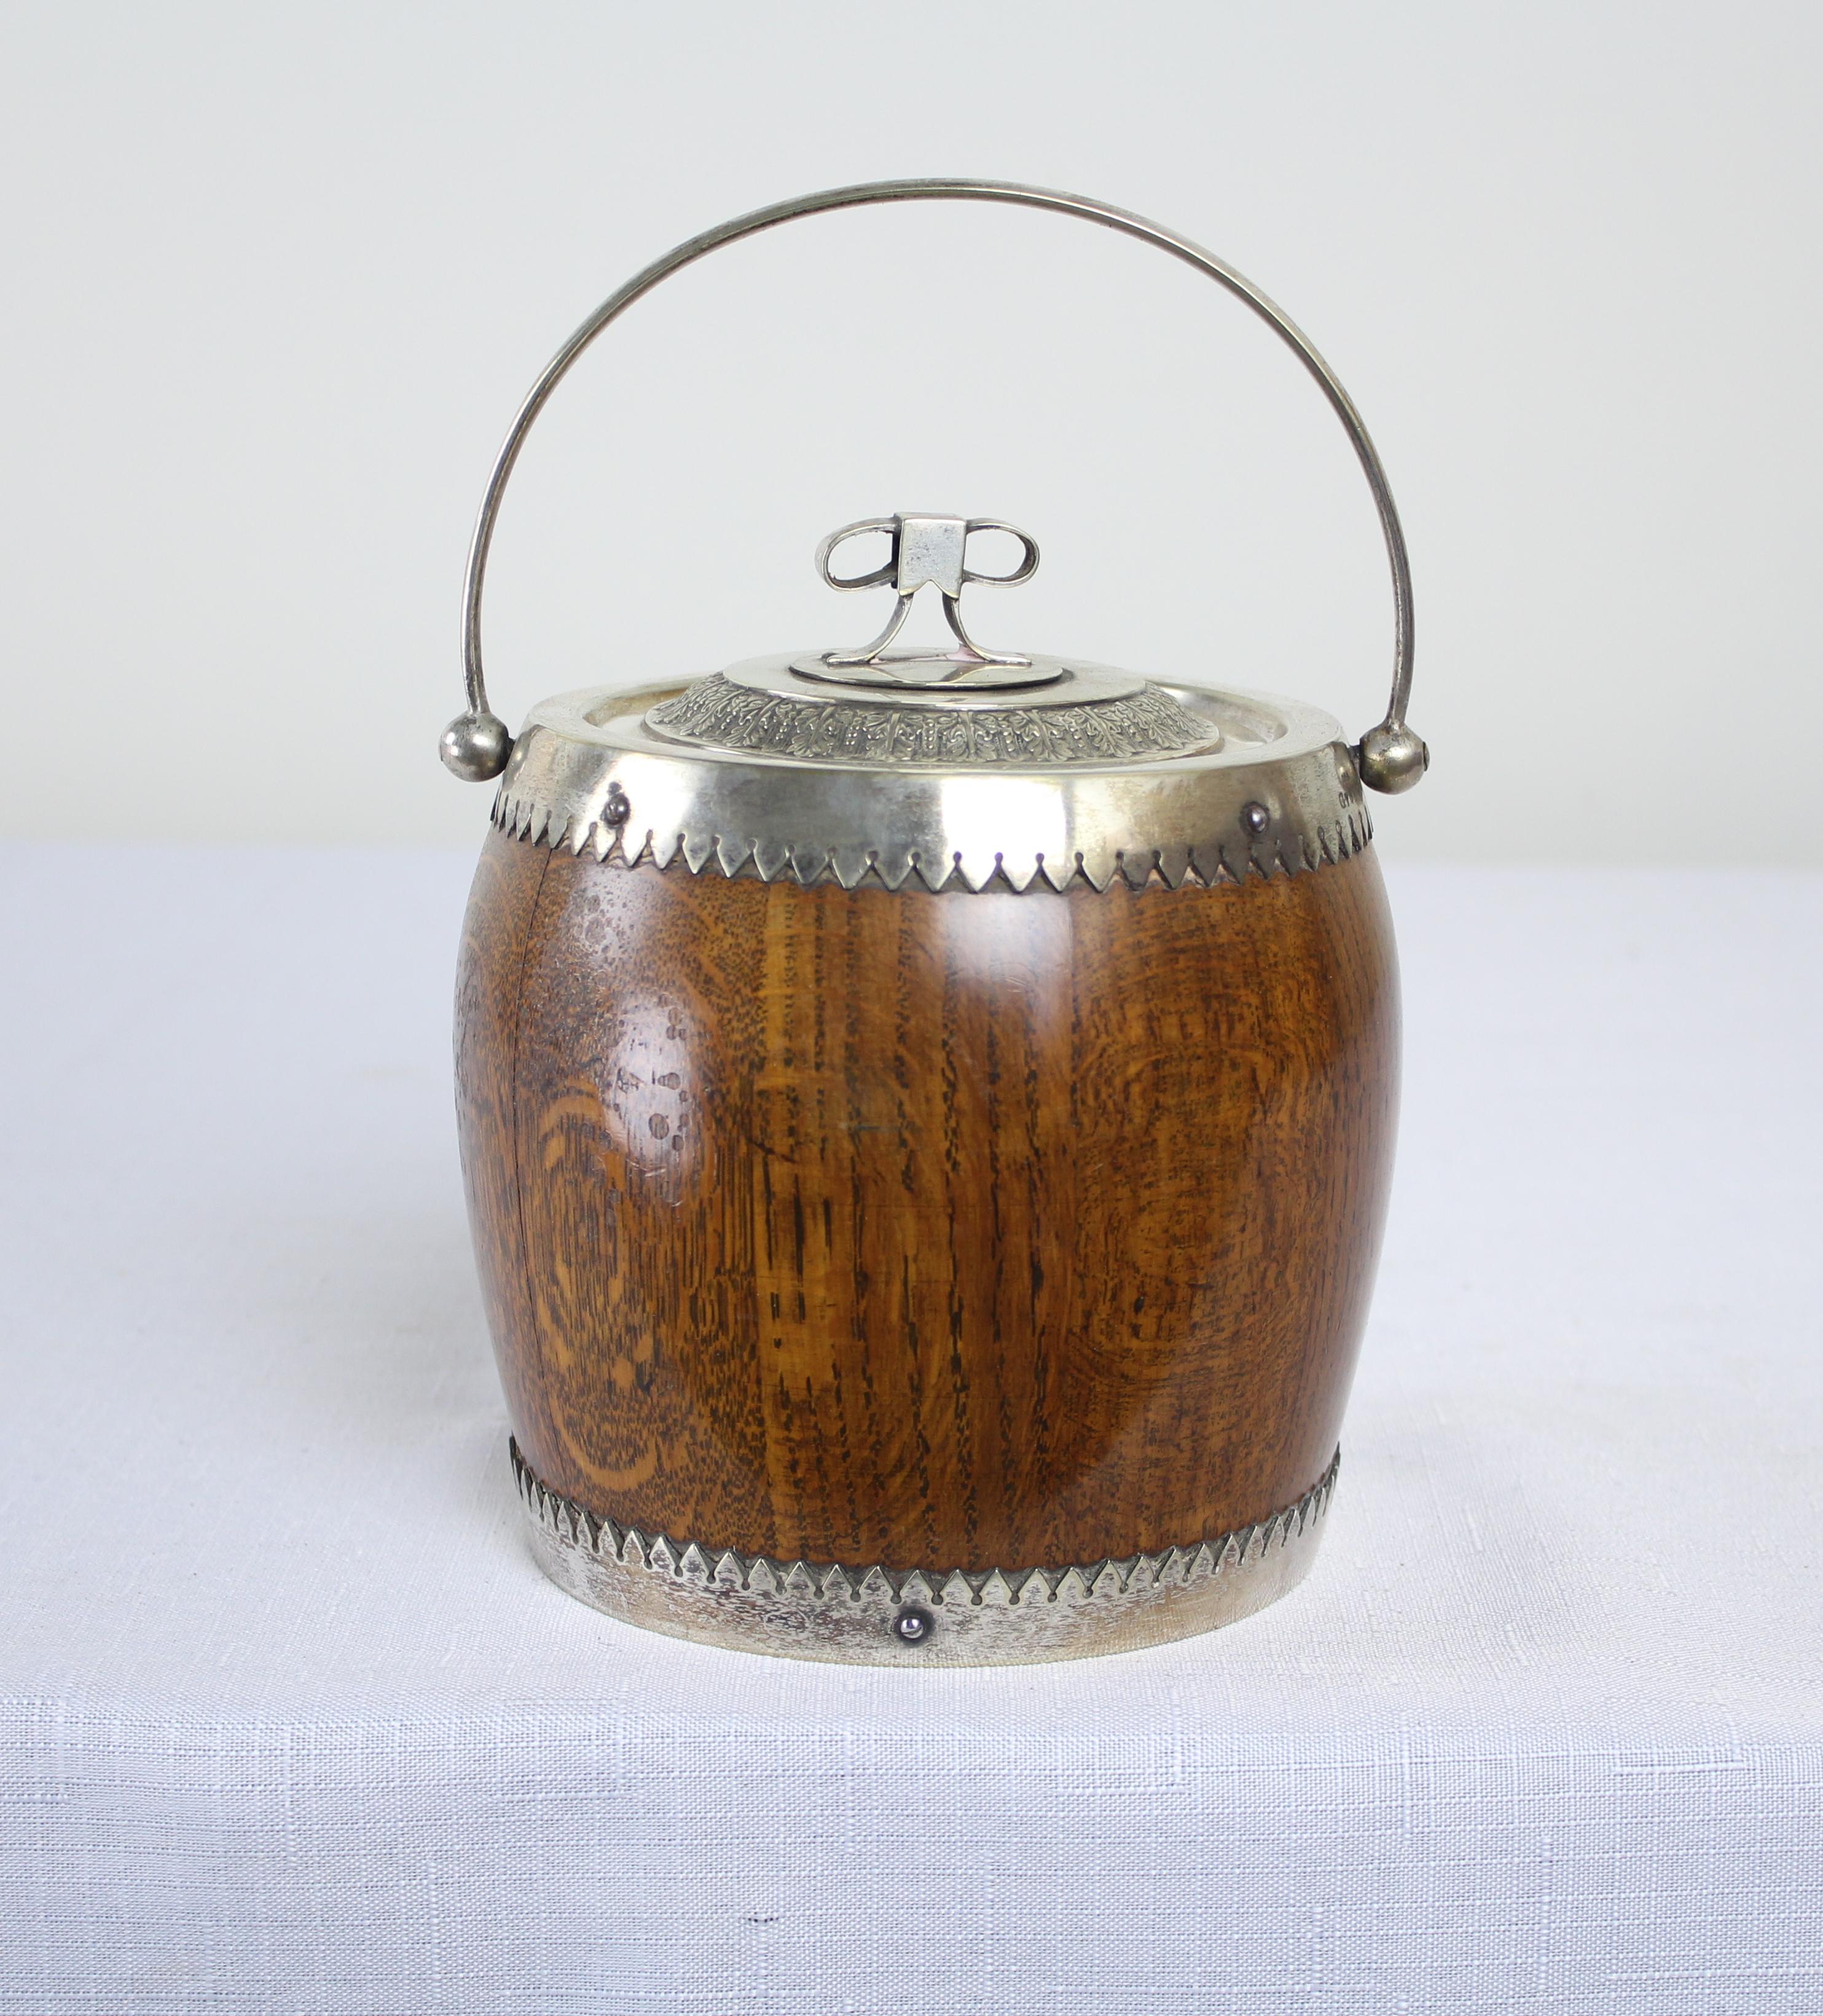 A charming oak biscuit barrel from the late 19th century. The metal is stamped “EPNS”, or Elecro Plated Nickel Silver, a metal alloy that is then silver plated. Traditional porcelain liner and sweet handle. The top has a great molded bow.